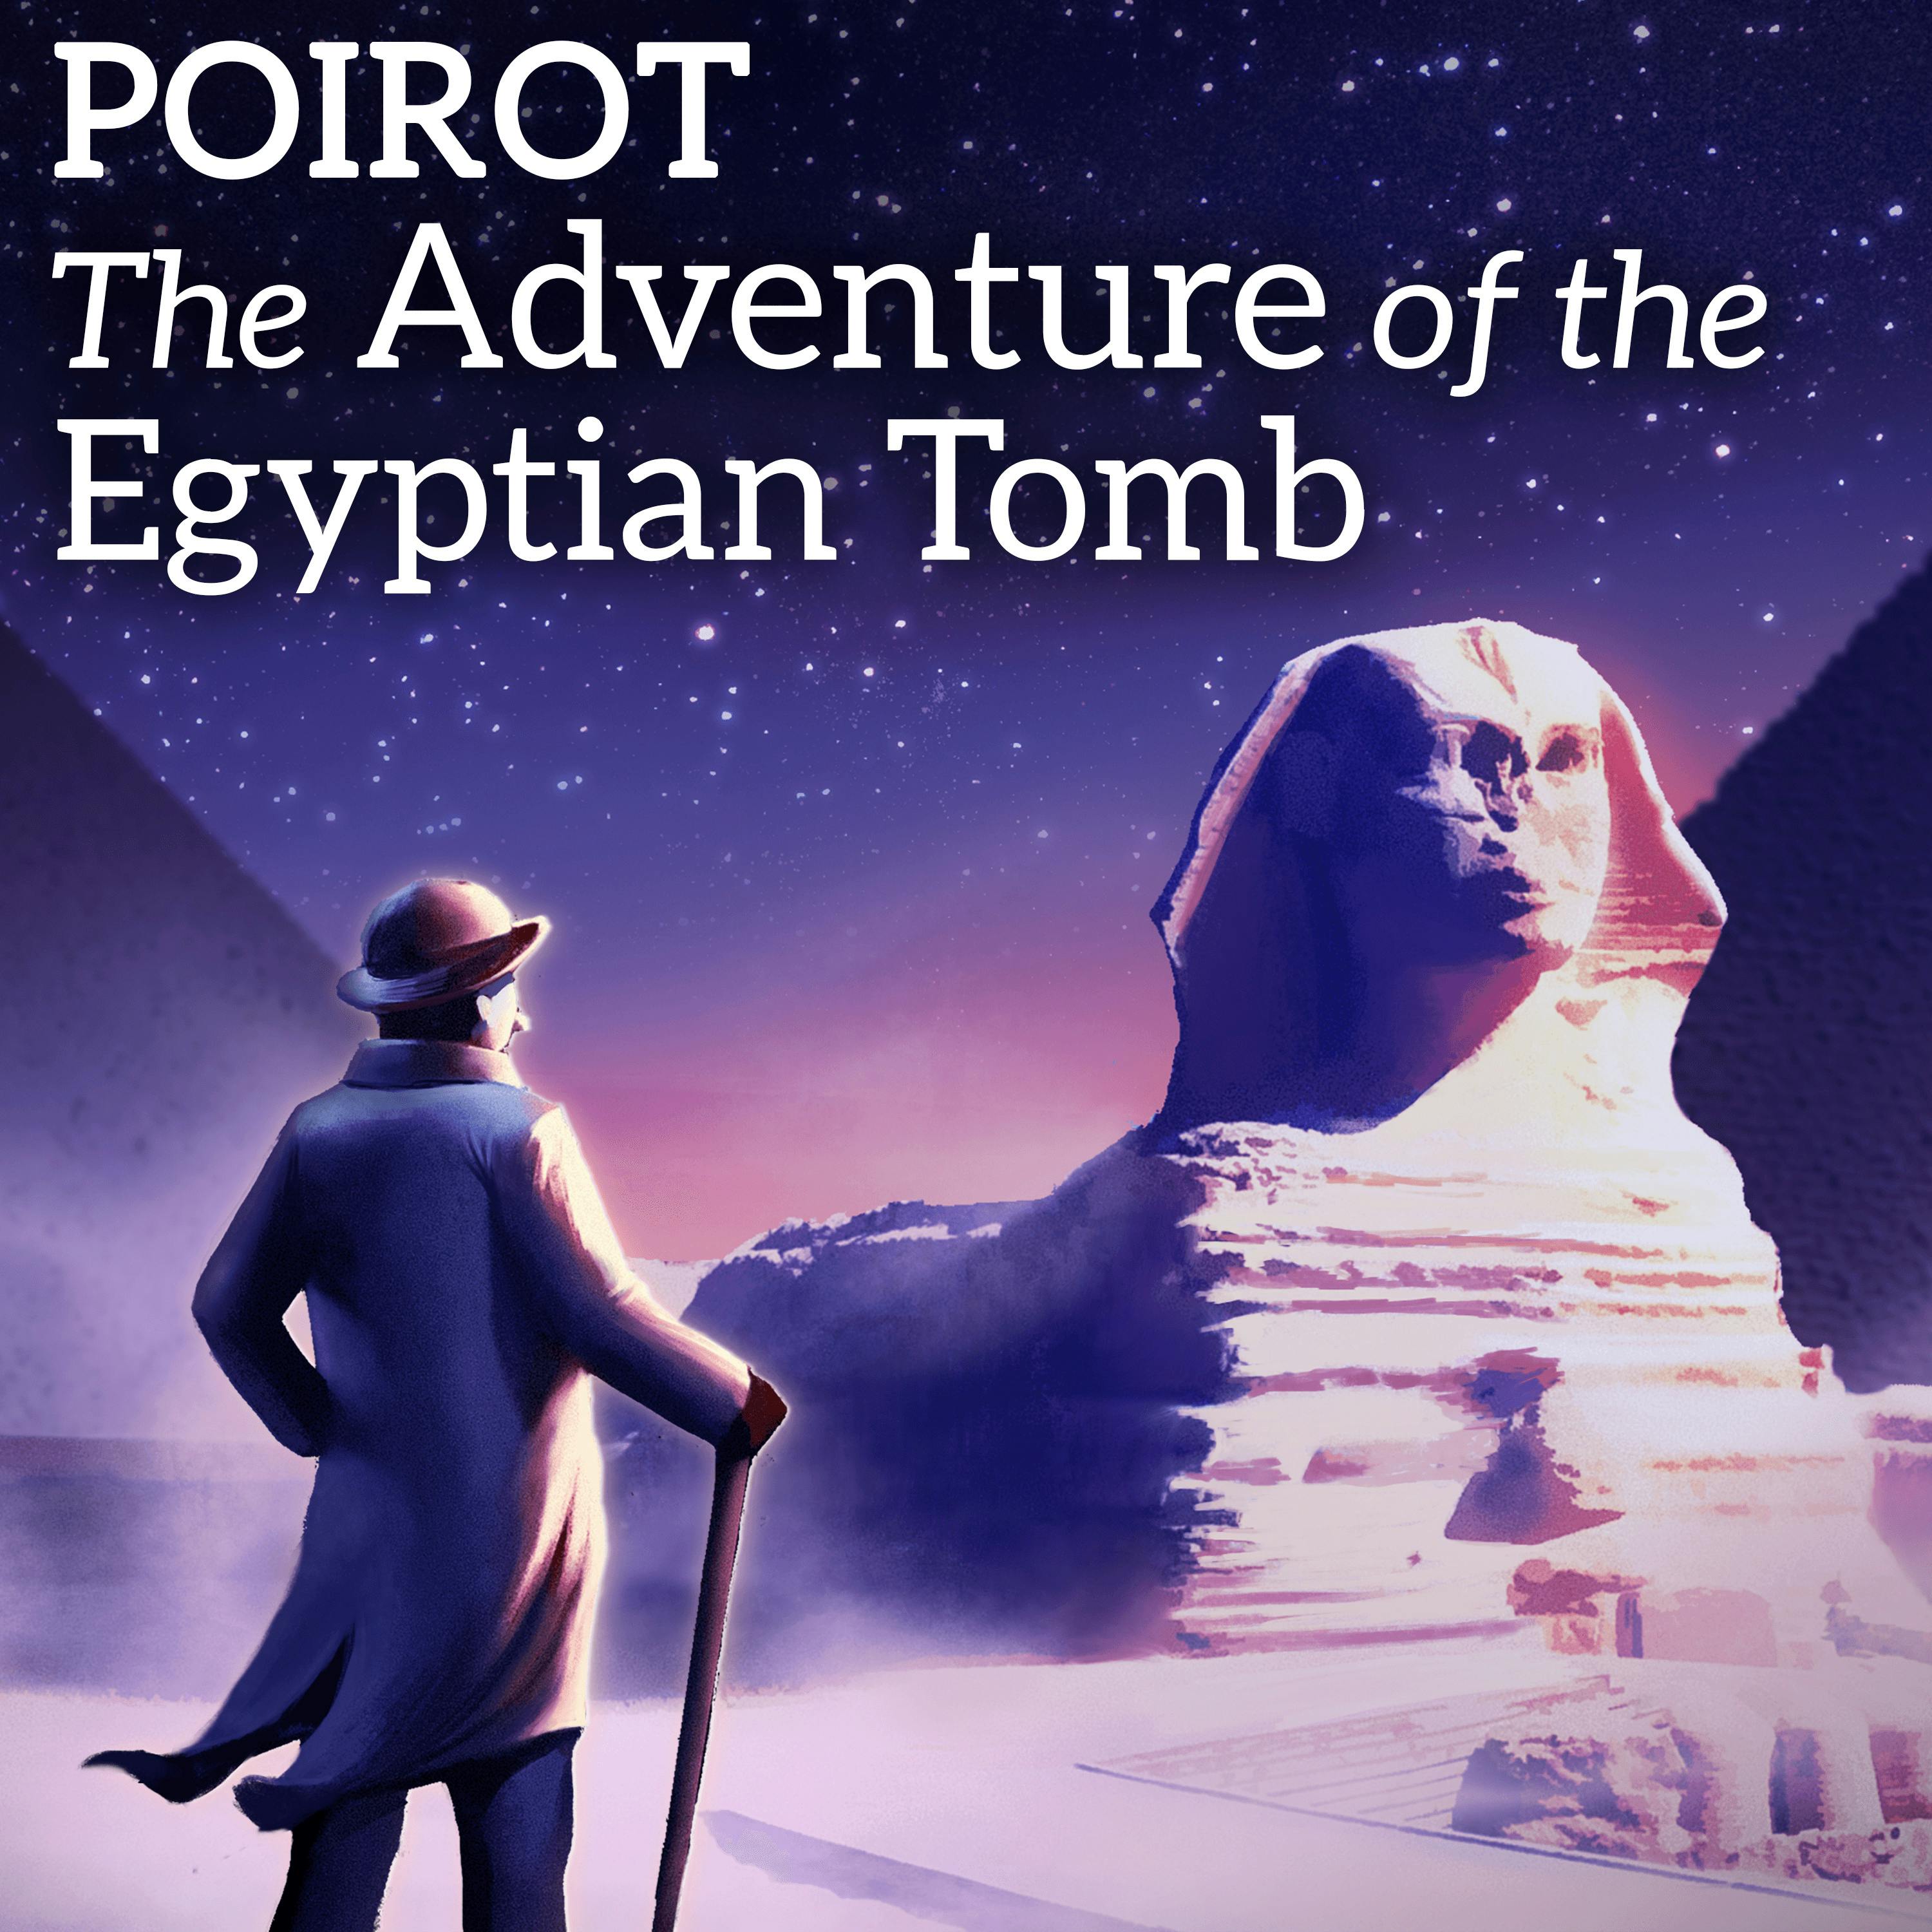 Poirot & The Adventure of the Egyptian Tomb - Agatha Christie